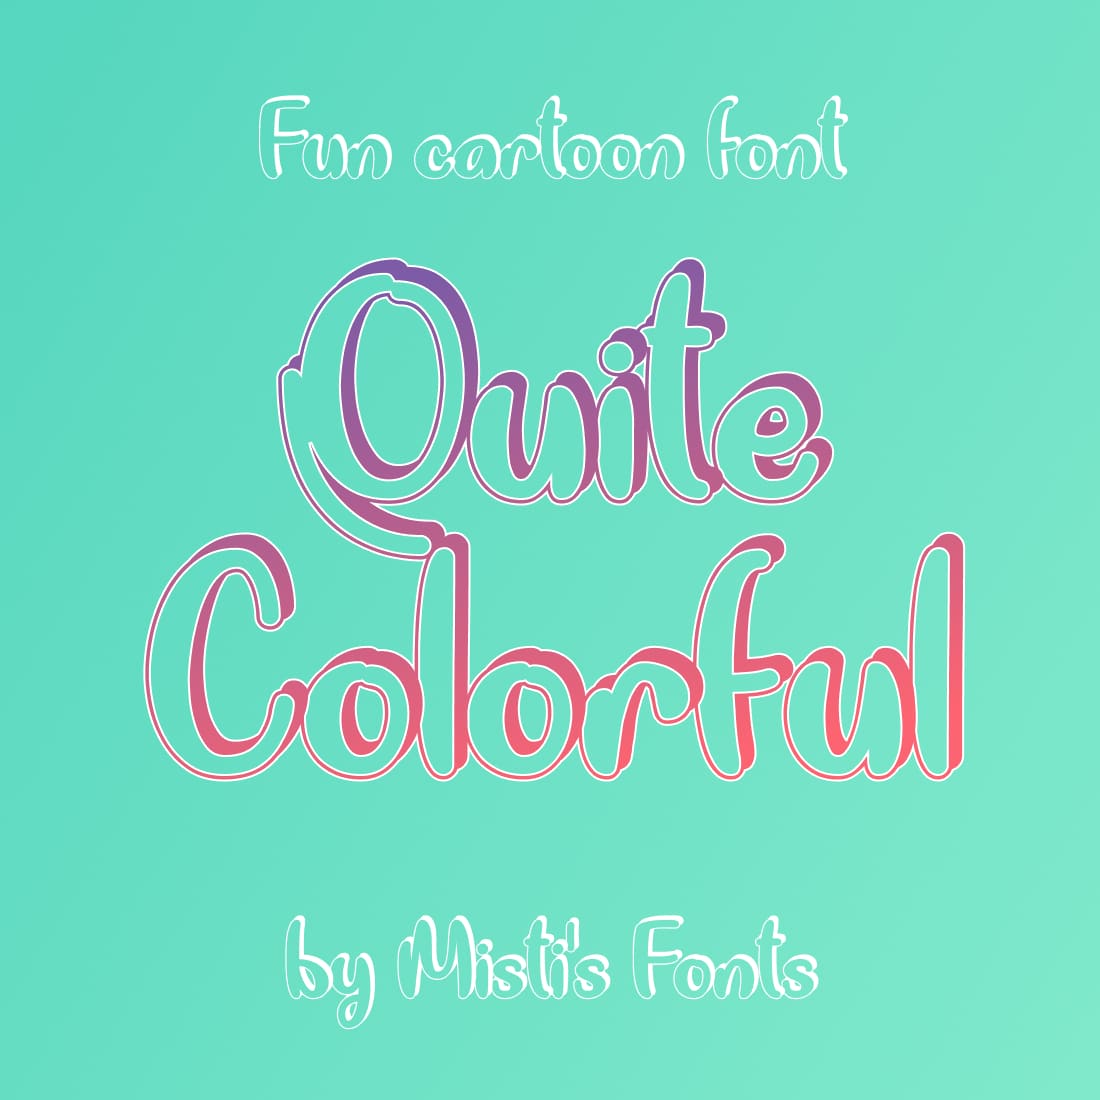 Free colorful font Main Cover Image by MasterBundles.